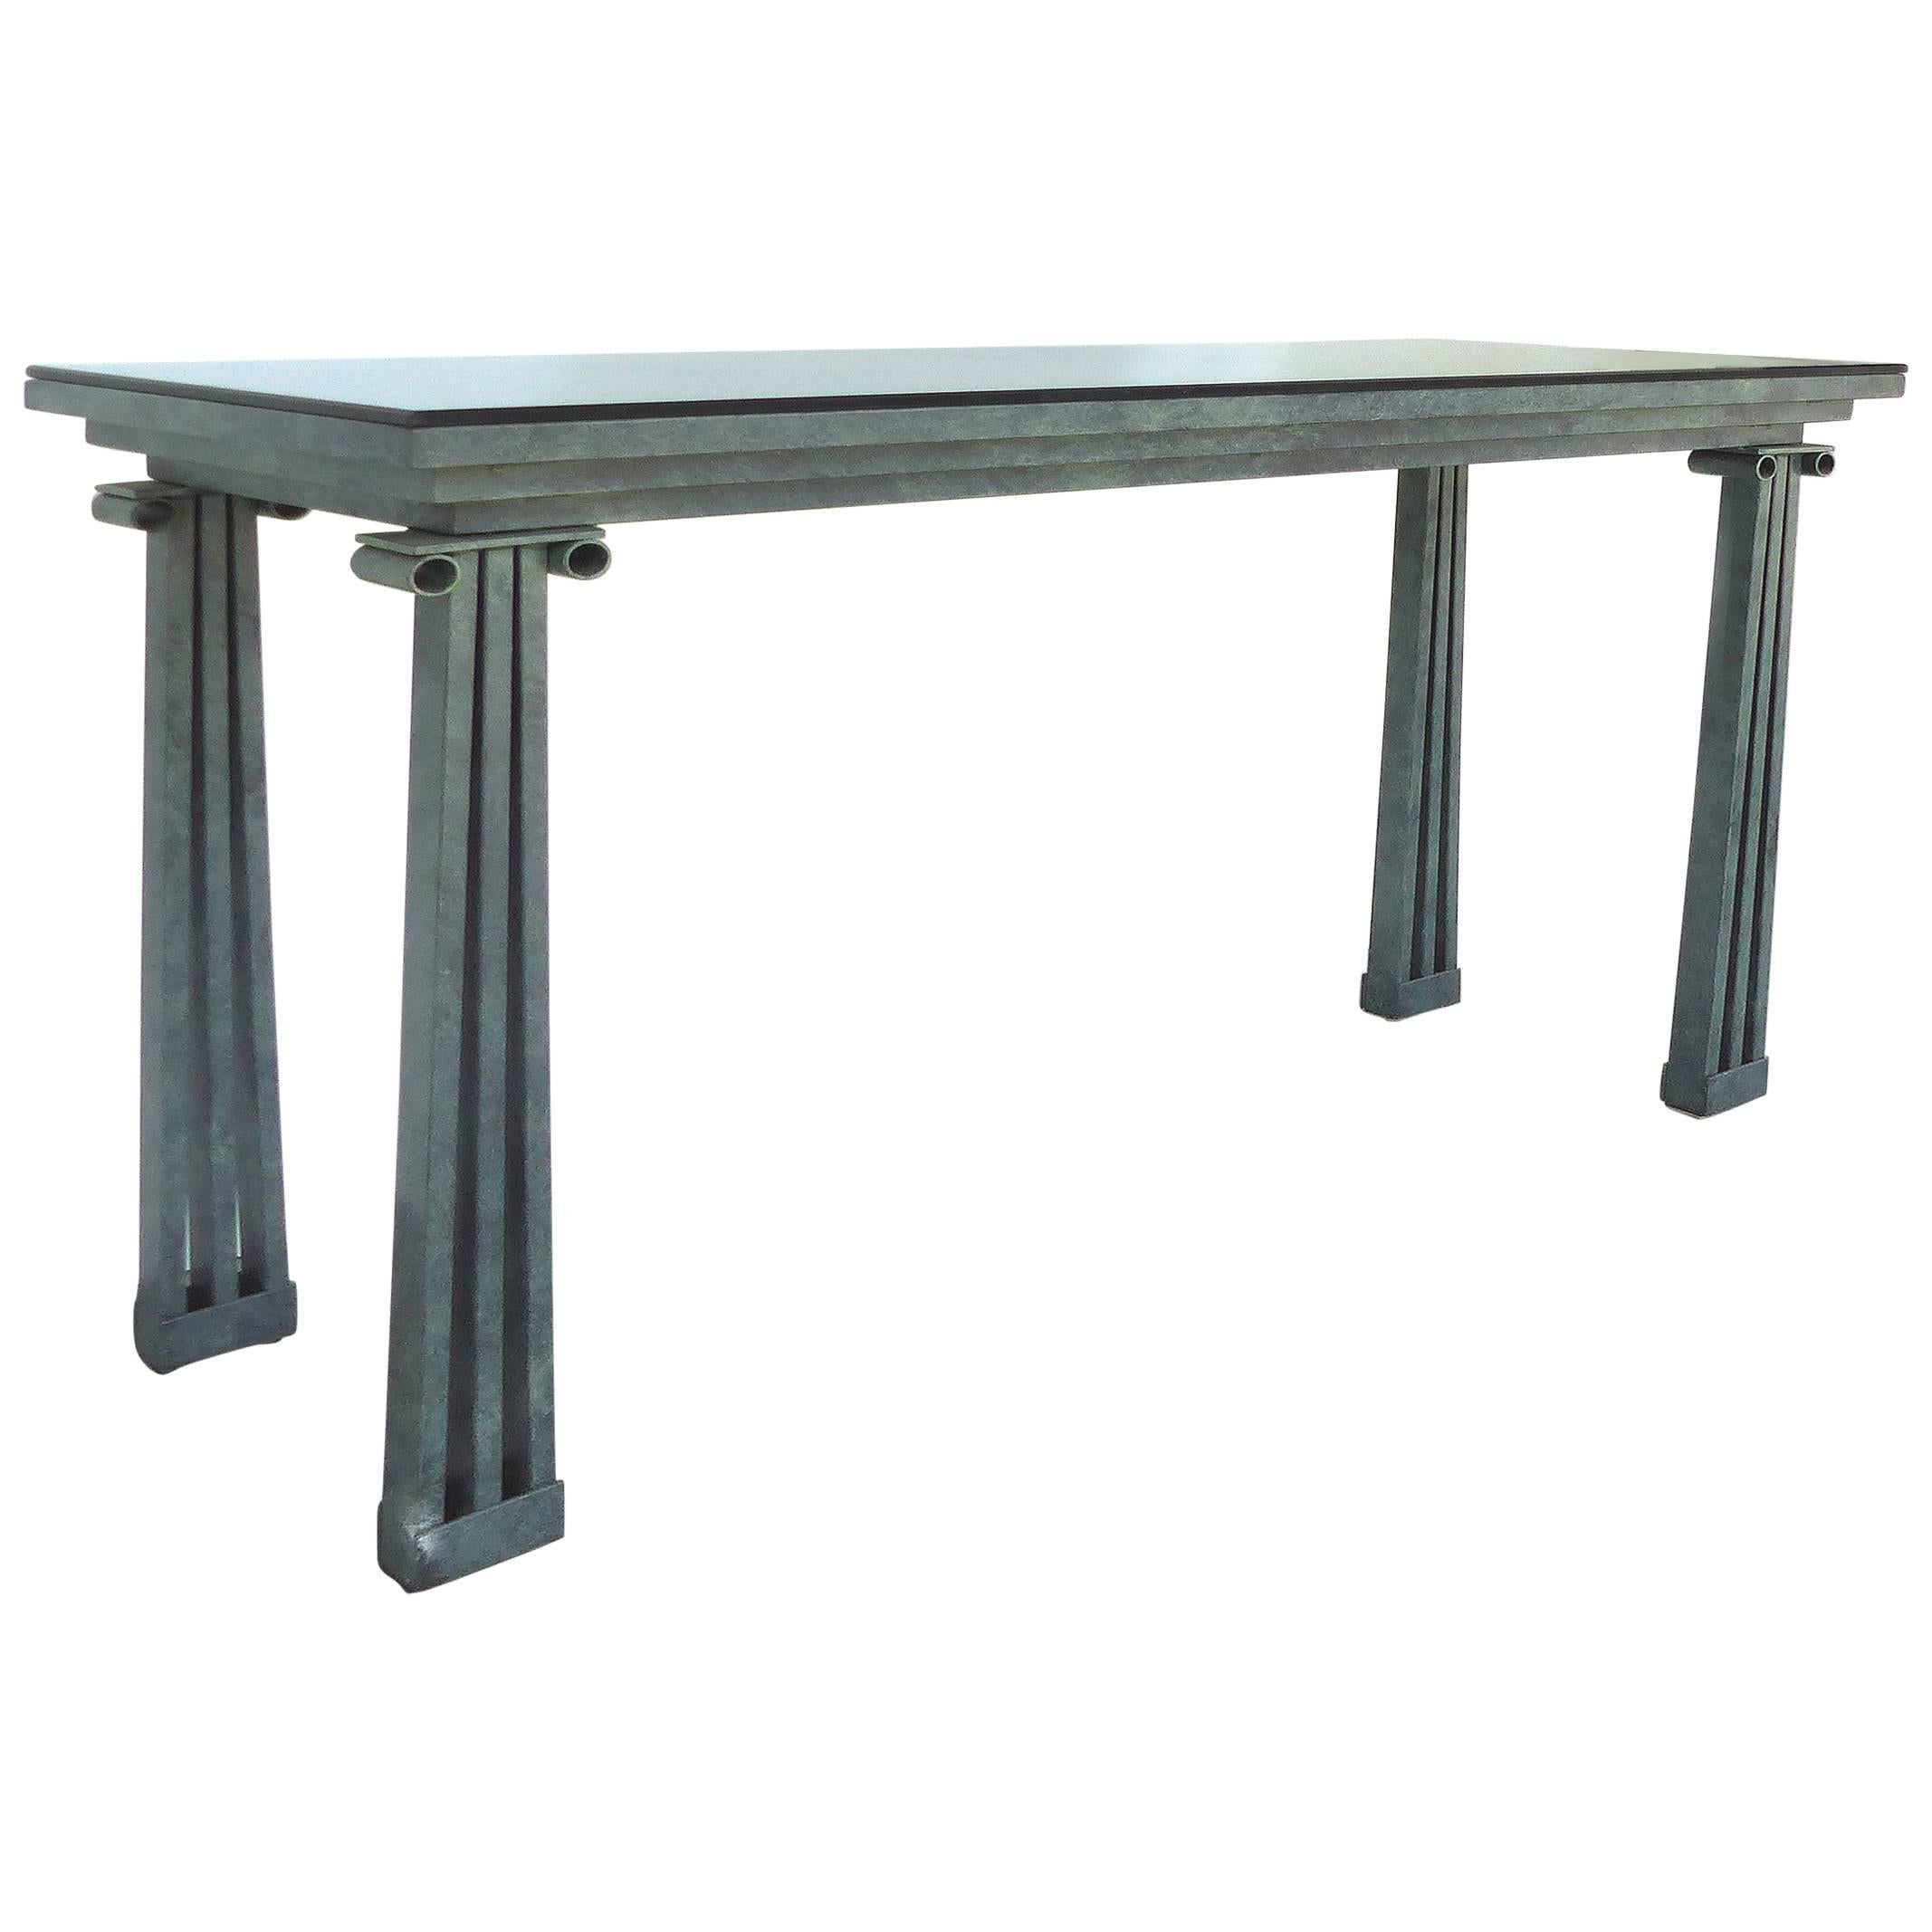 Post Modernist Architectural Console Table with Smoked Glass & Verdigris Finish